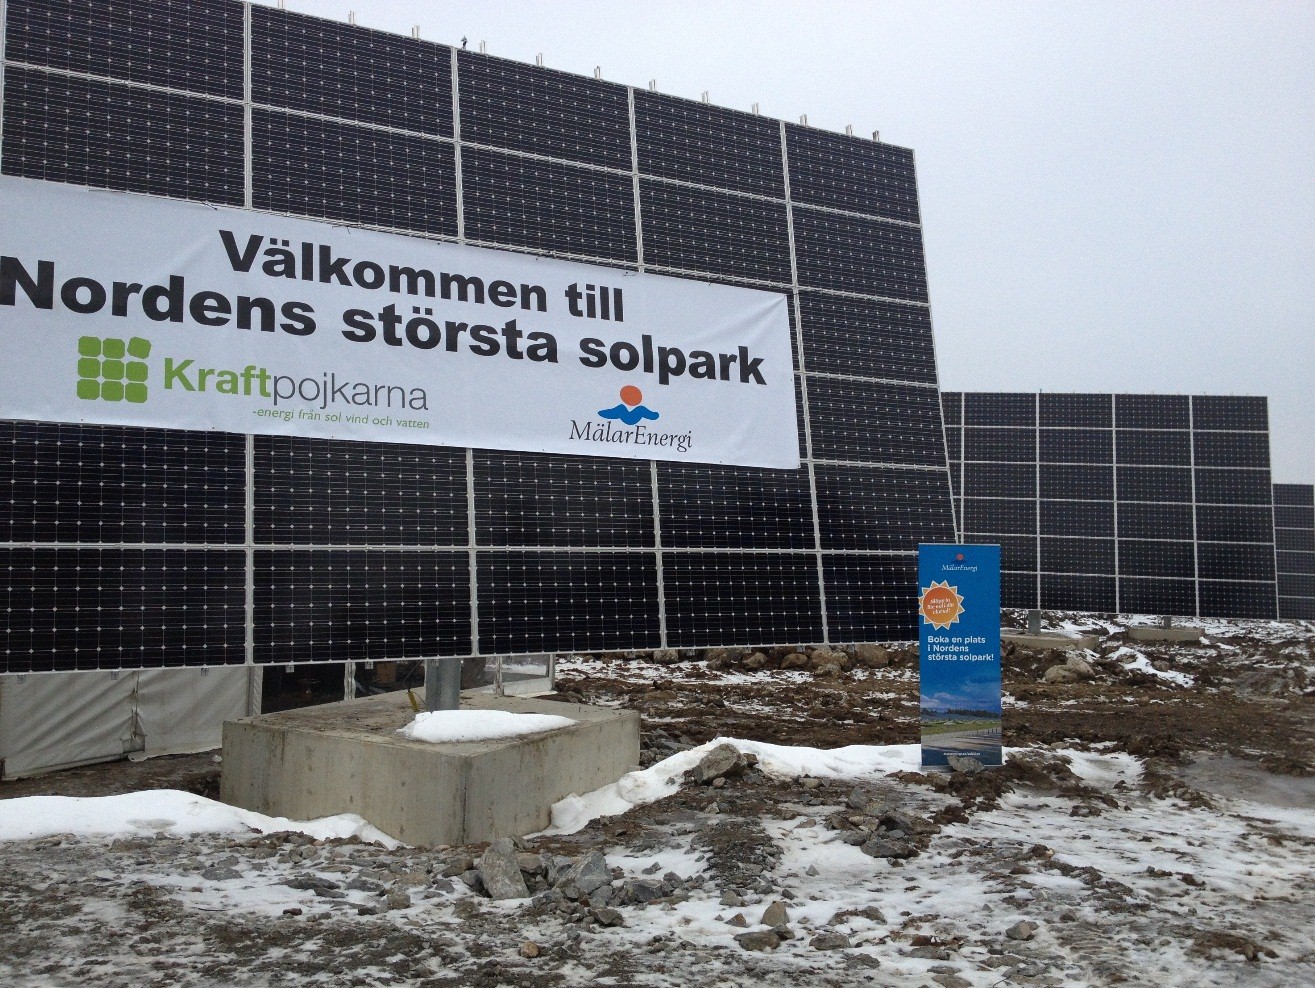 "Welcome to the Nordic’s largest Solar Park"